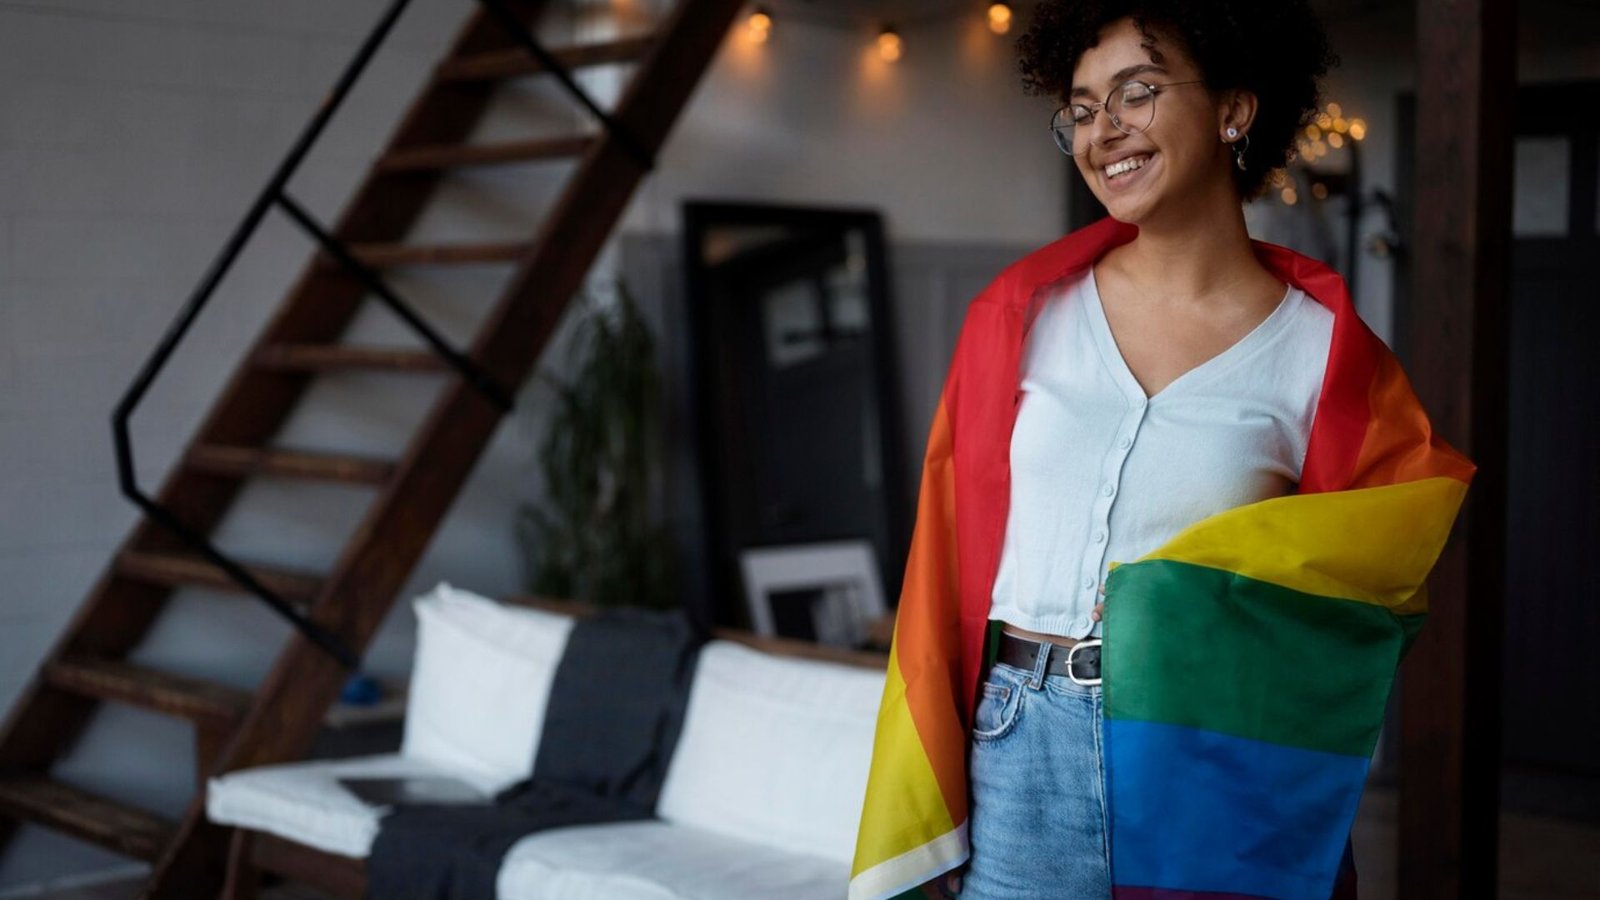 LGBTQ+ Rights in the Workplace